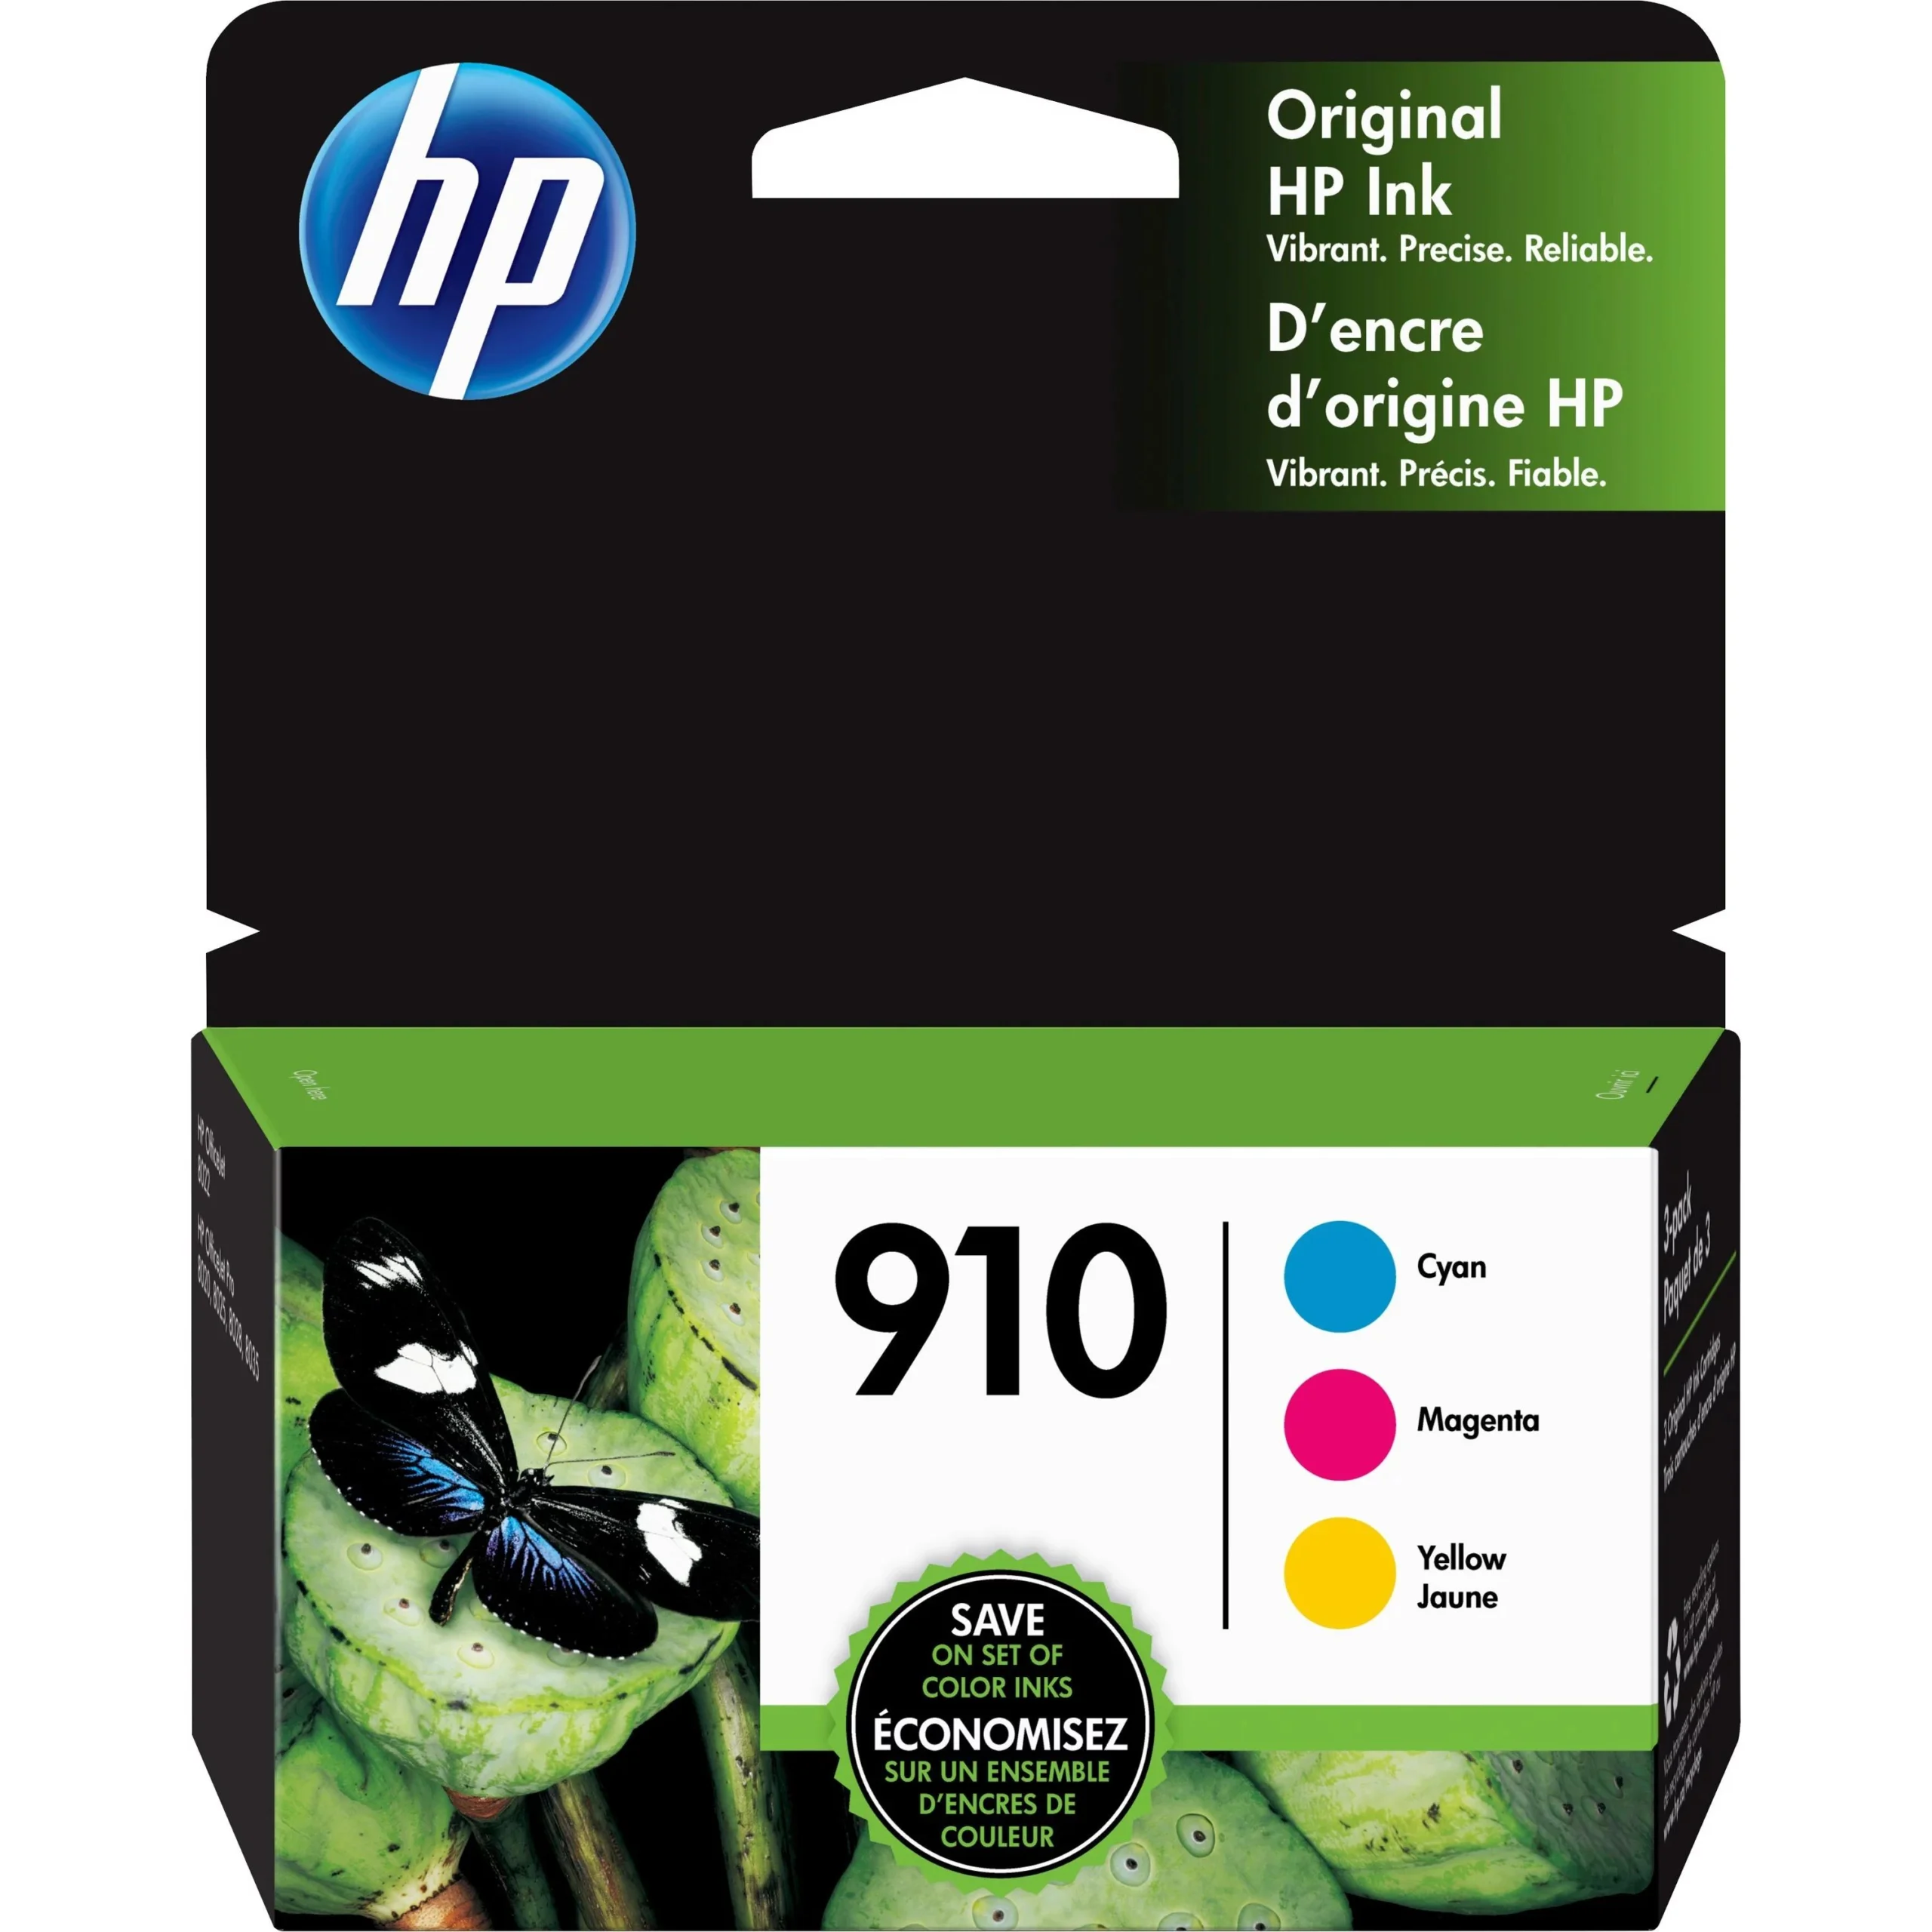 hewlett packard 910 ink cartridges - What is the difference between HP 910 and 910XL ink cartridges